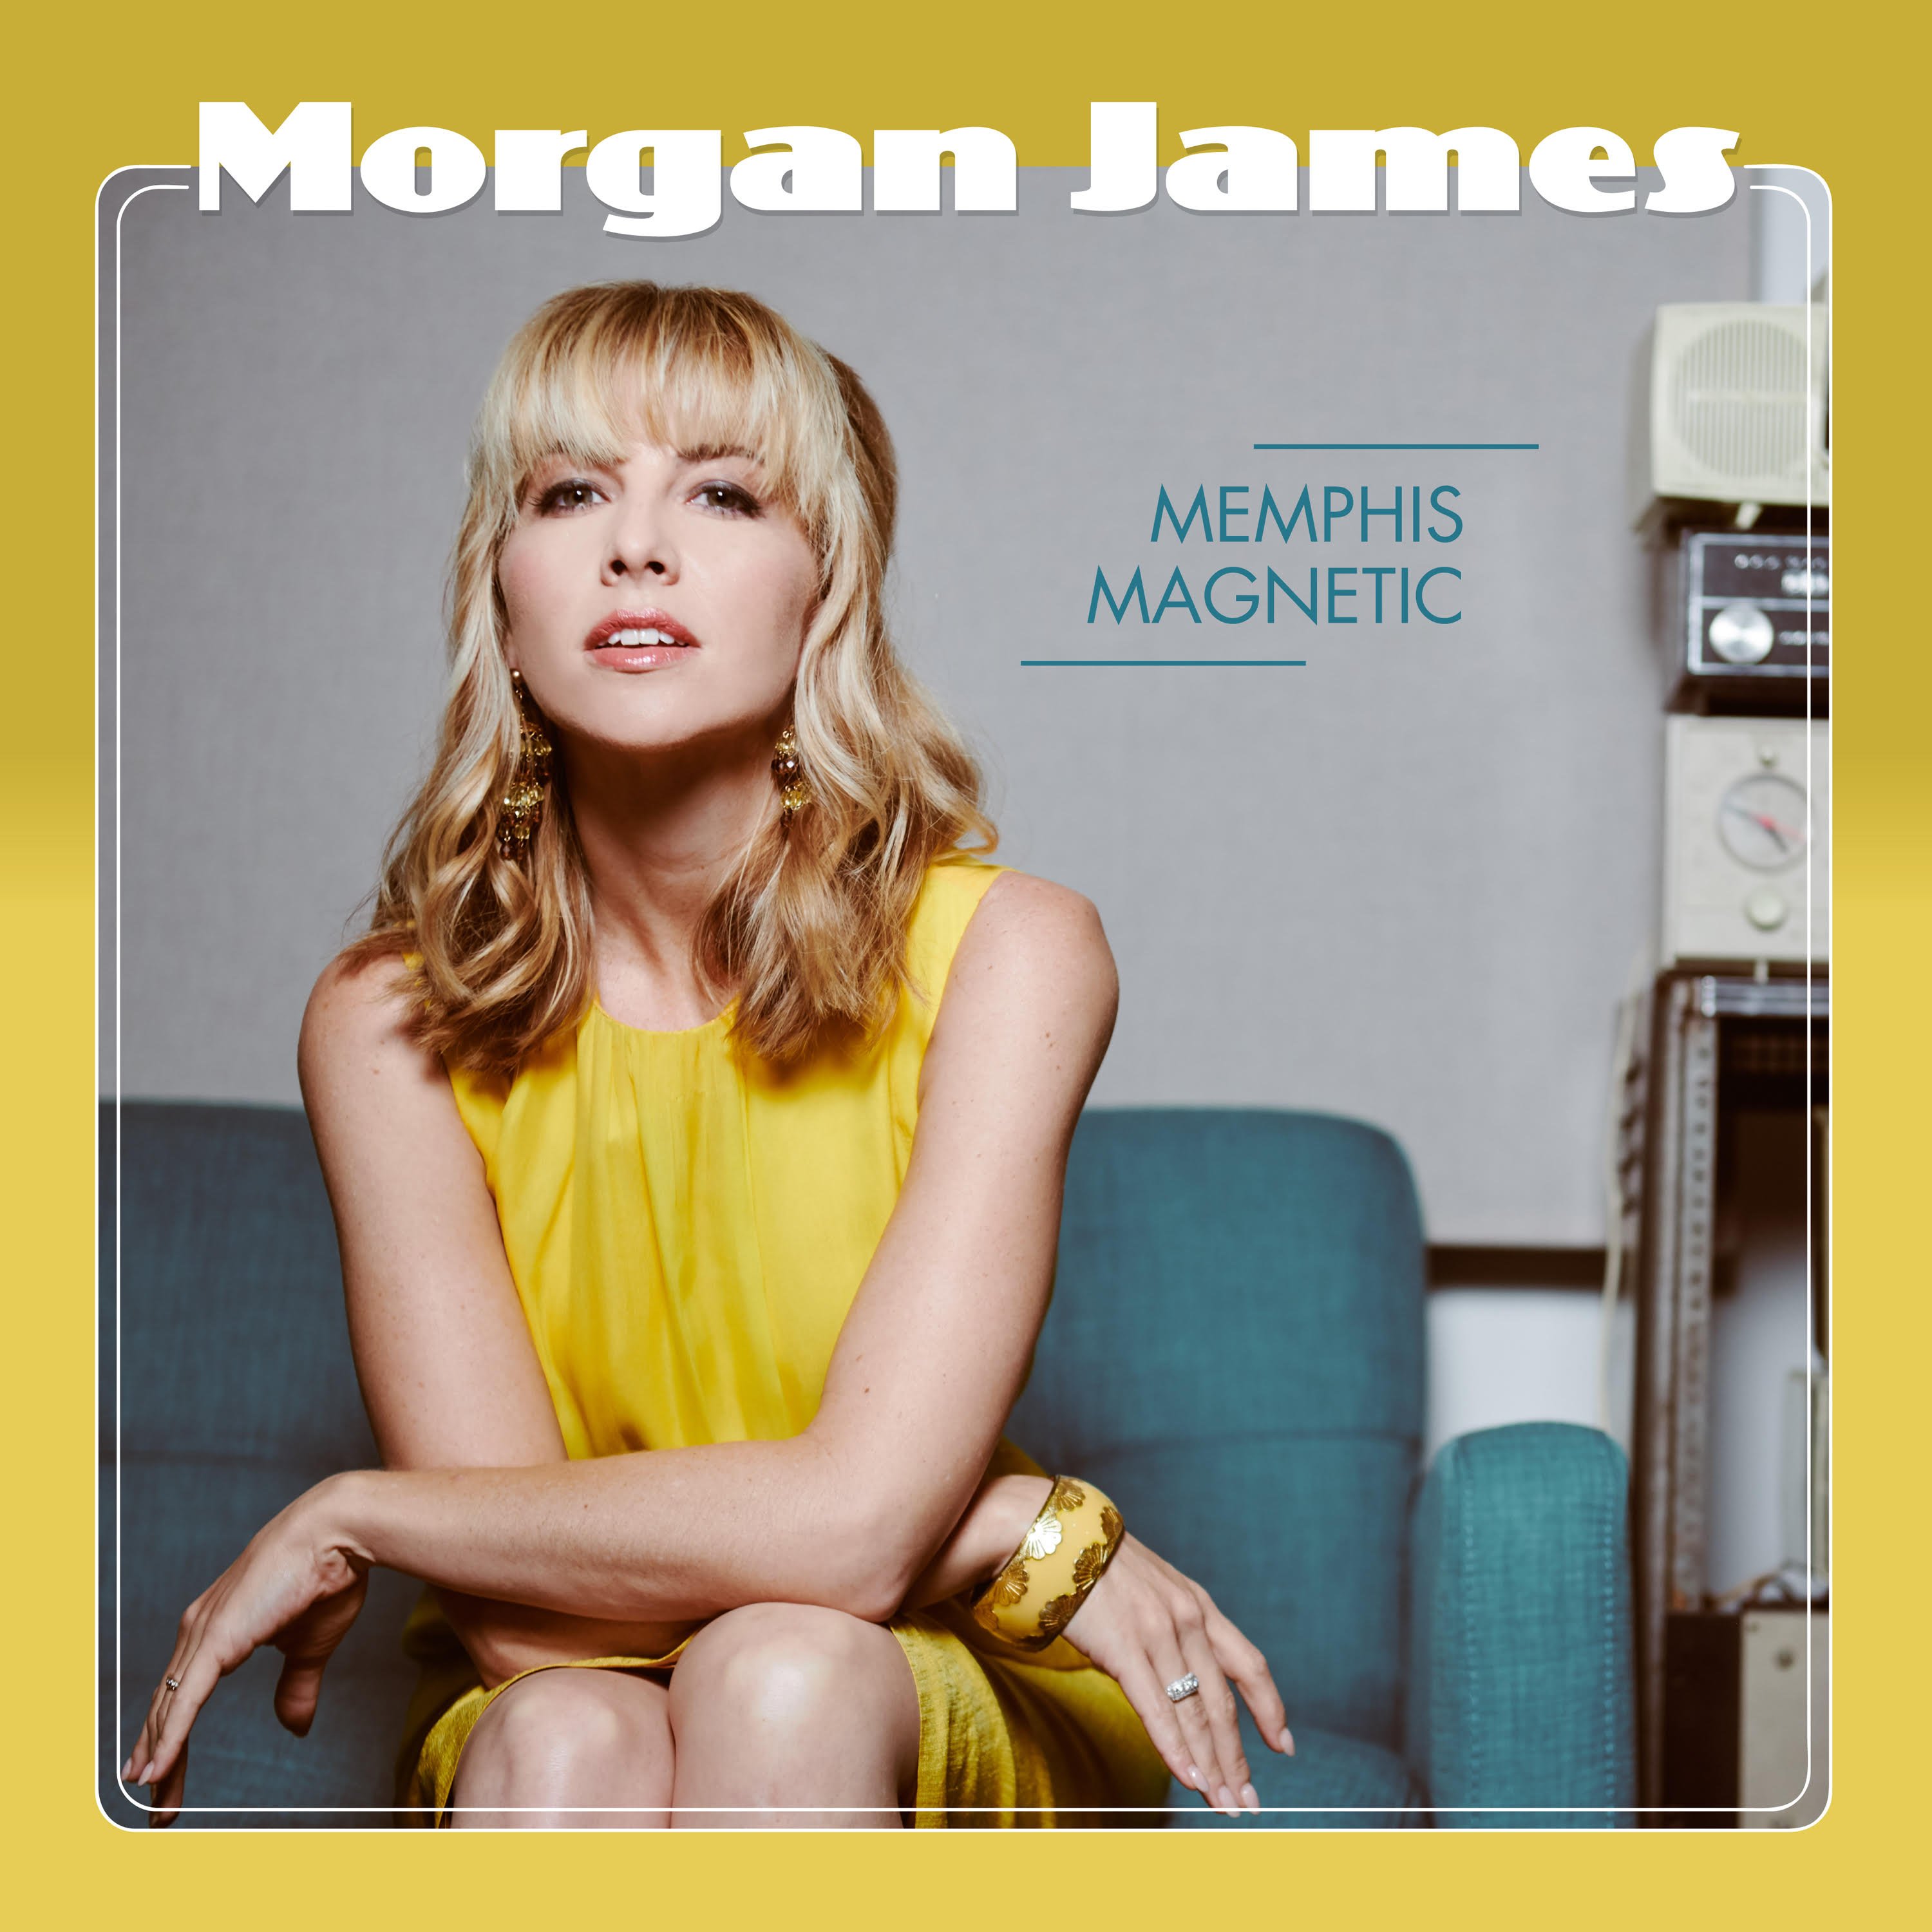 The album cover for Memphis Magnetic